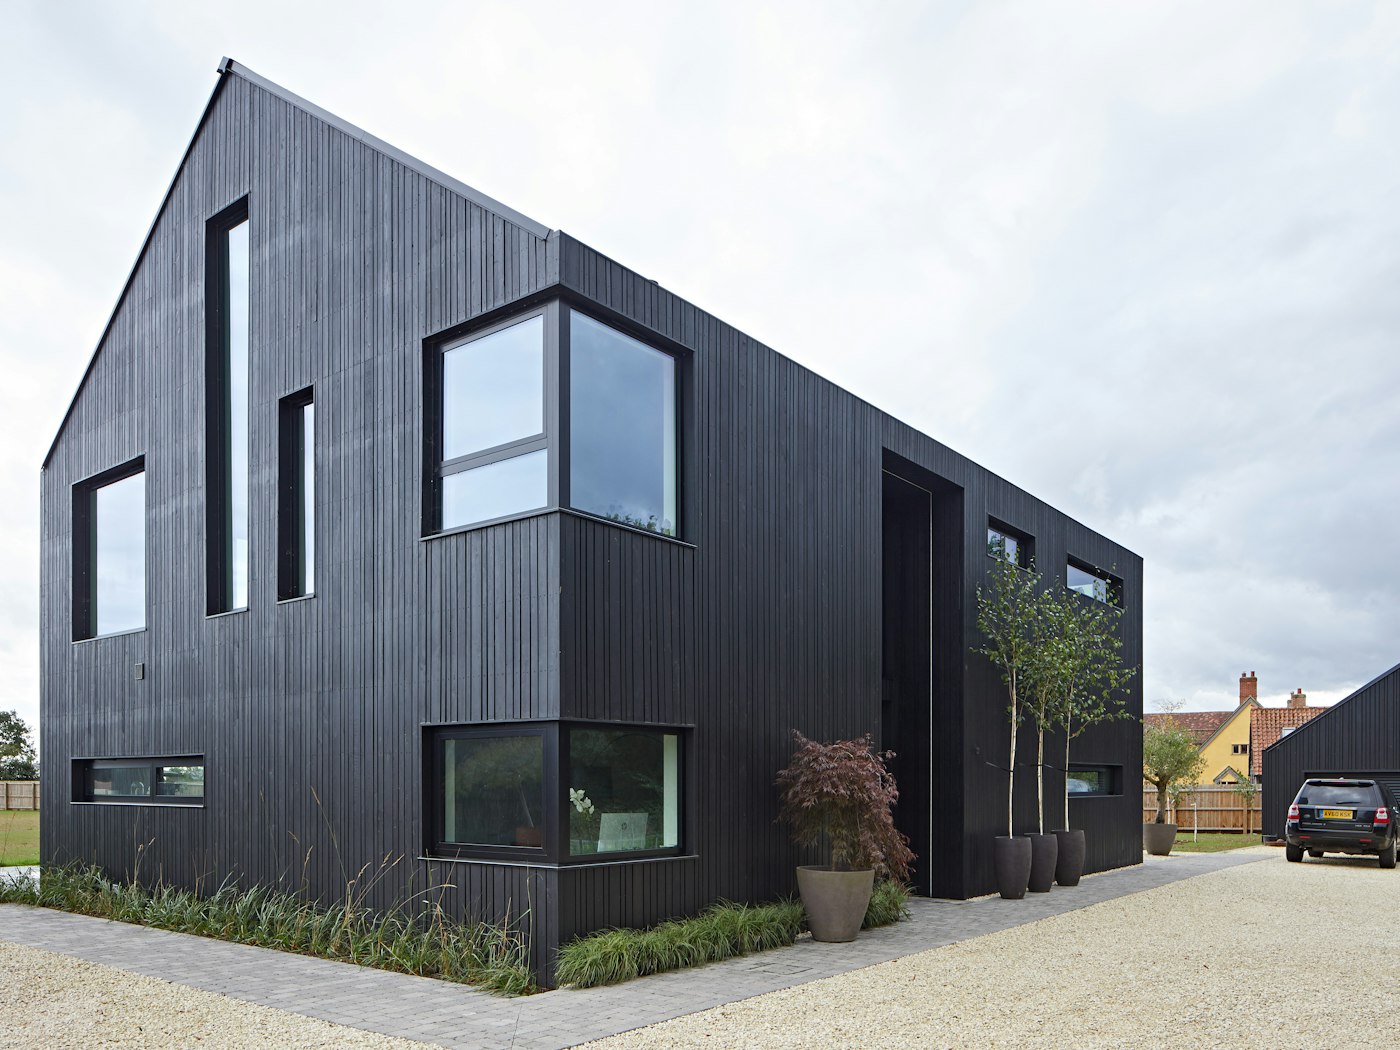 The full exterior of this self-build is a wonderful example of modern design